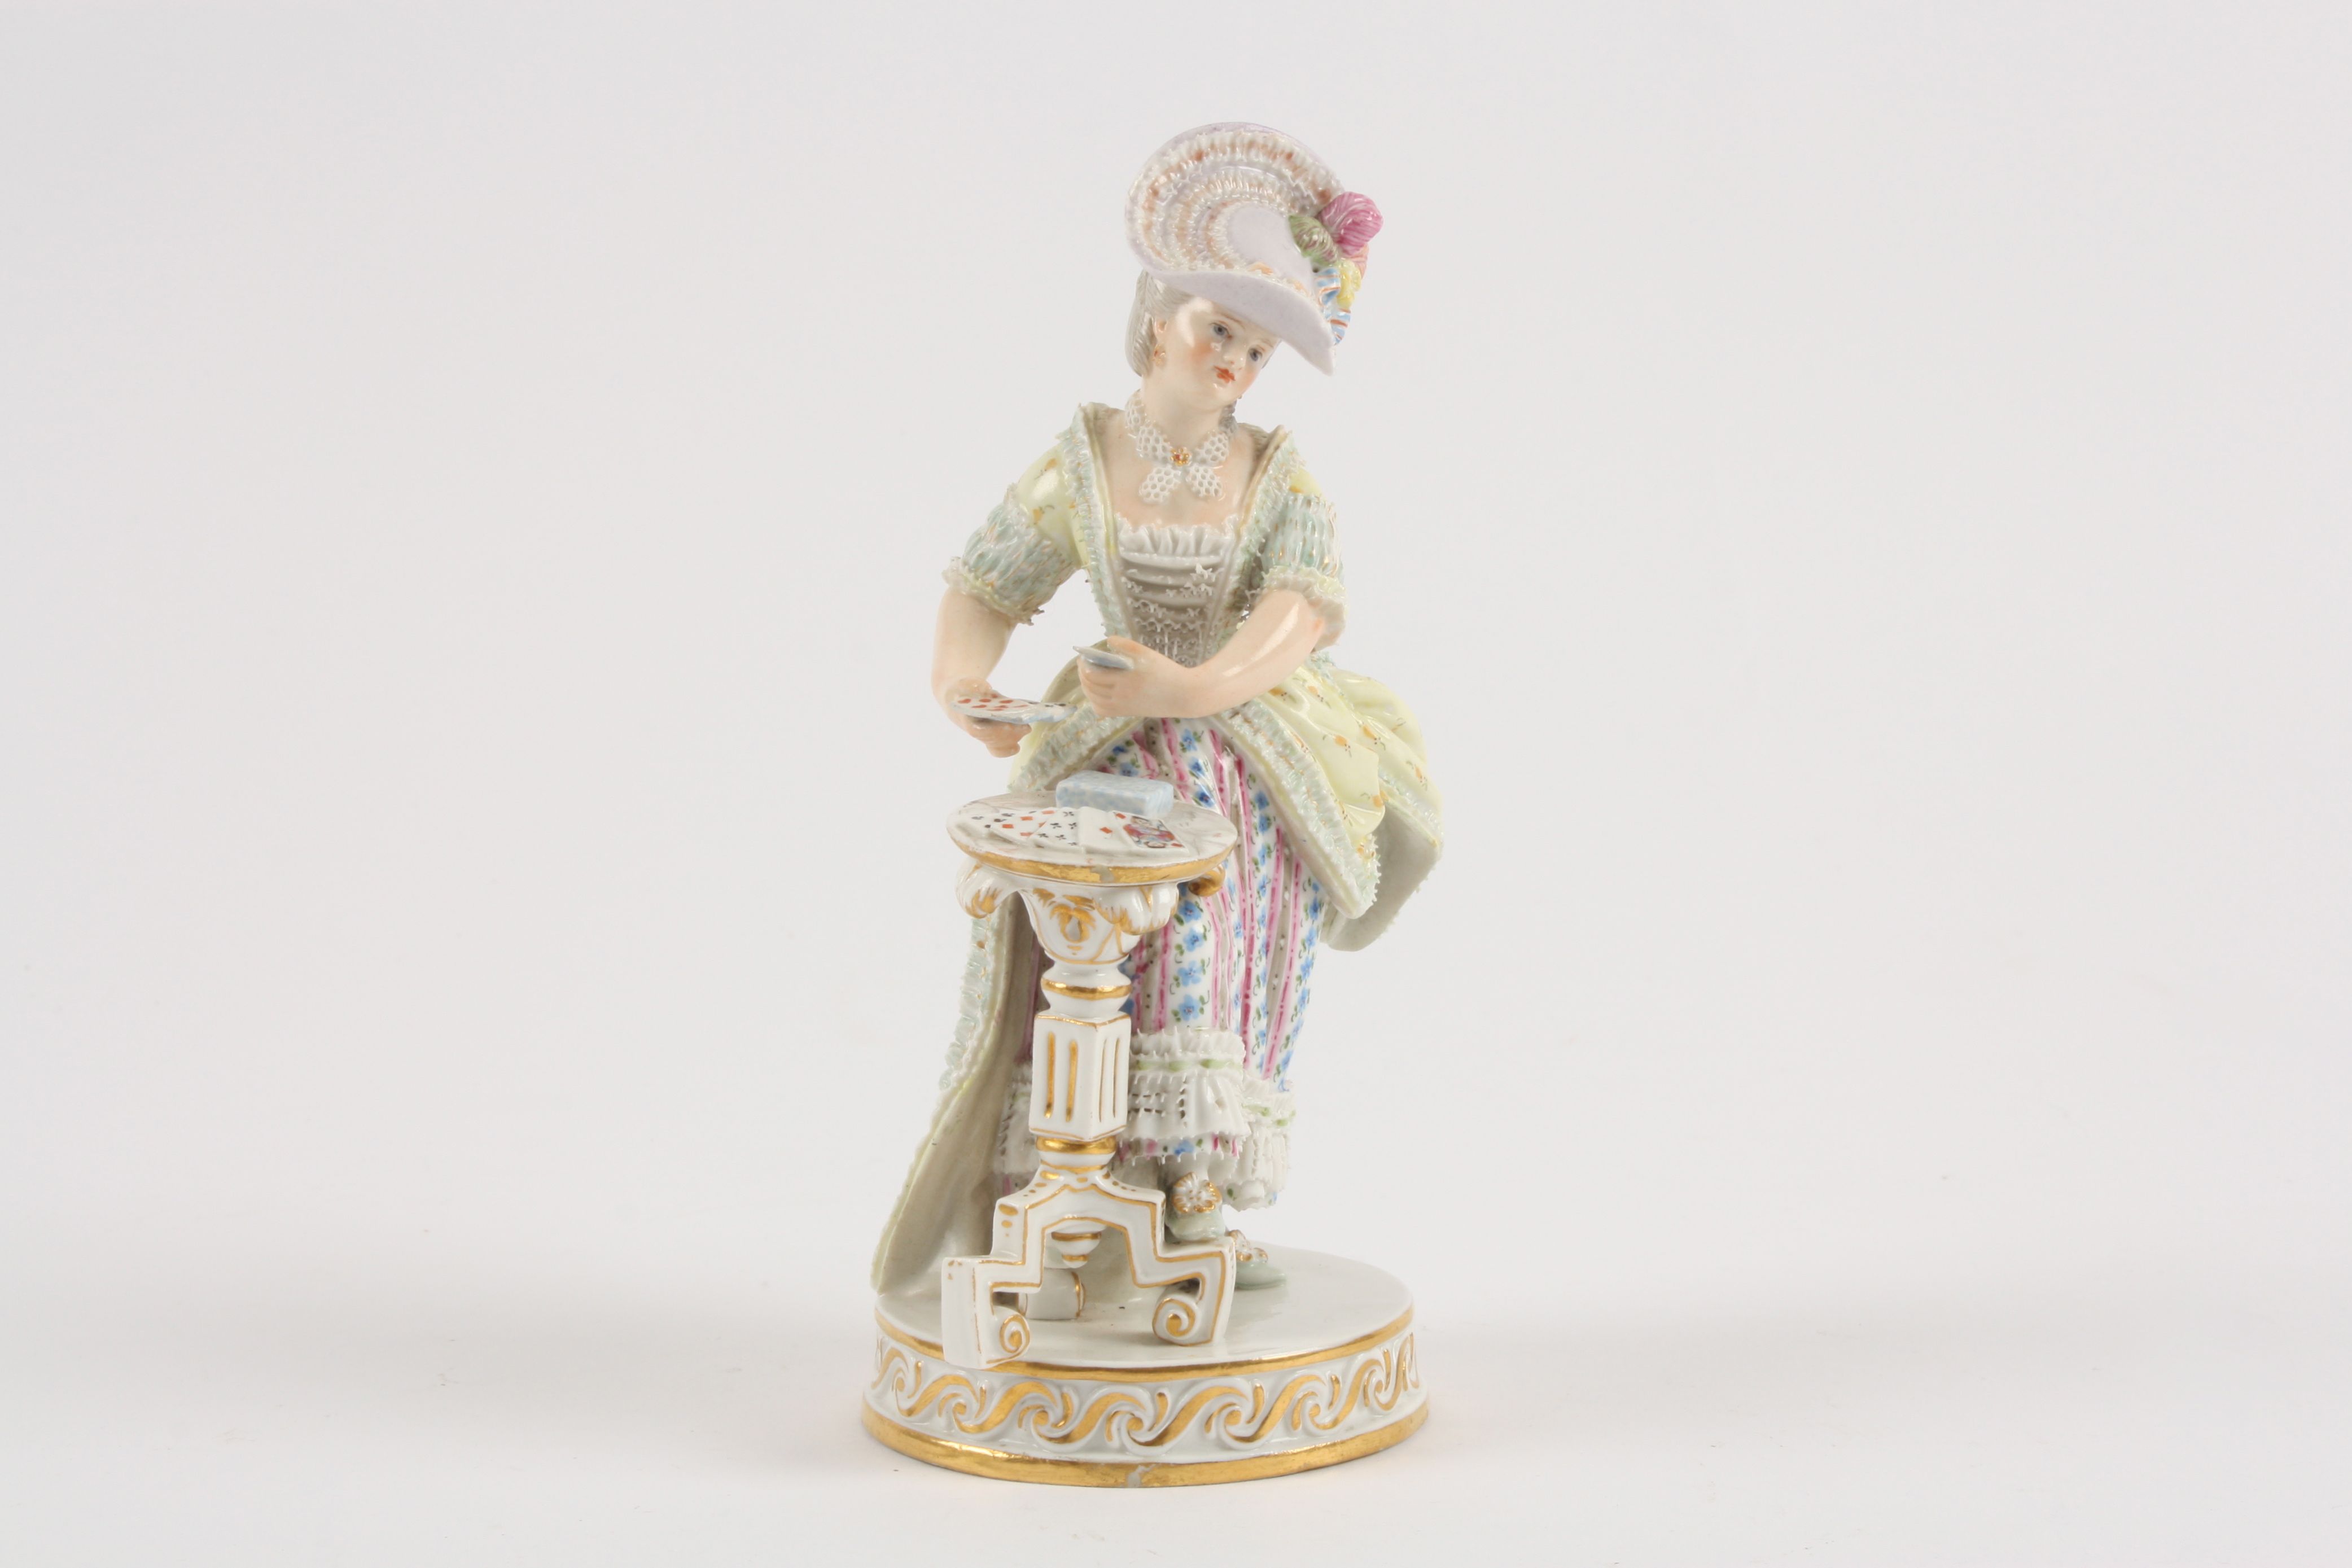 A 19th century Meissen porcelain figure of a young lady playing cards in standing pose, dealing